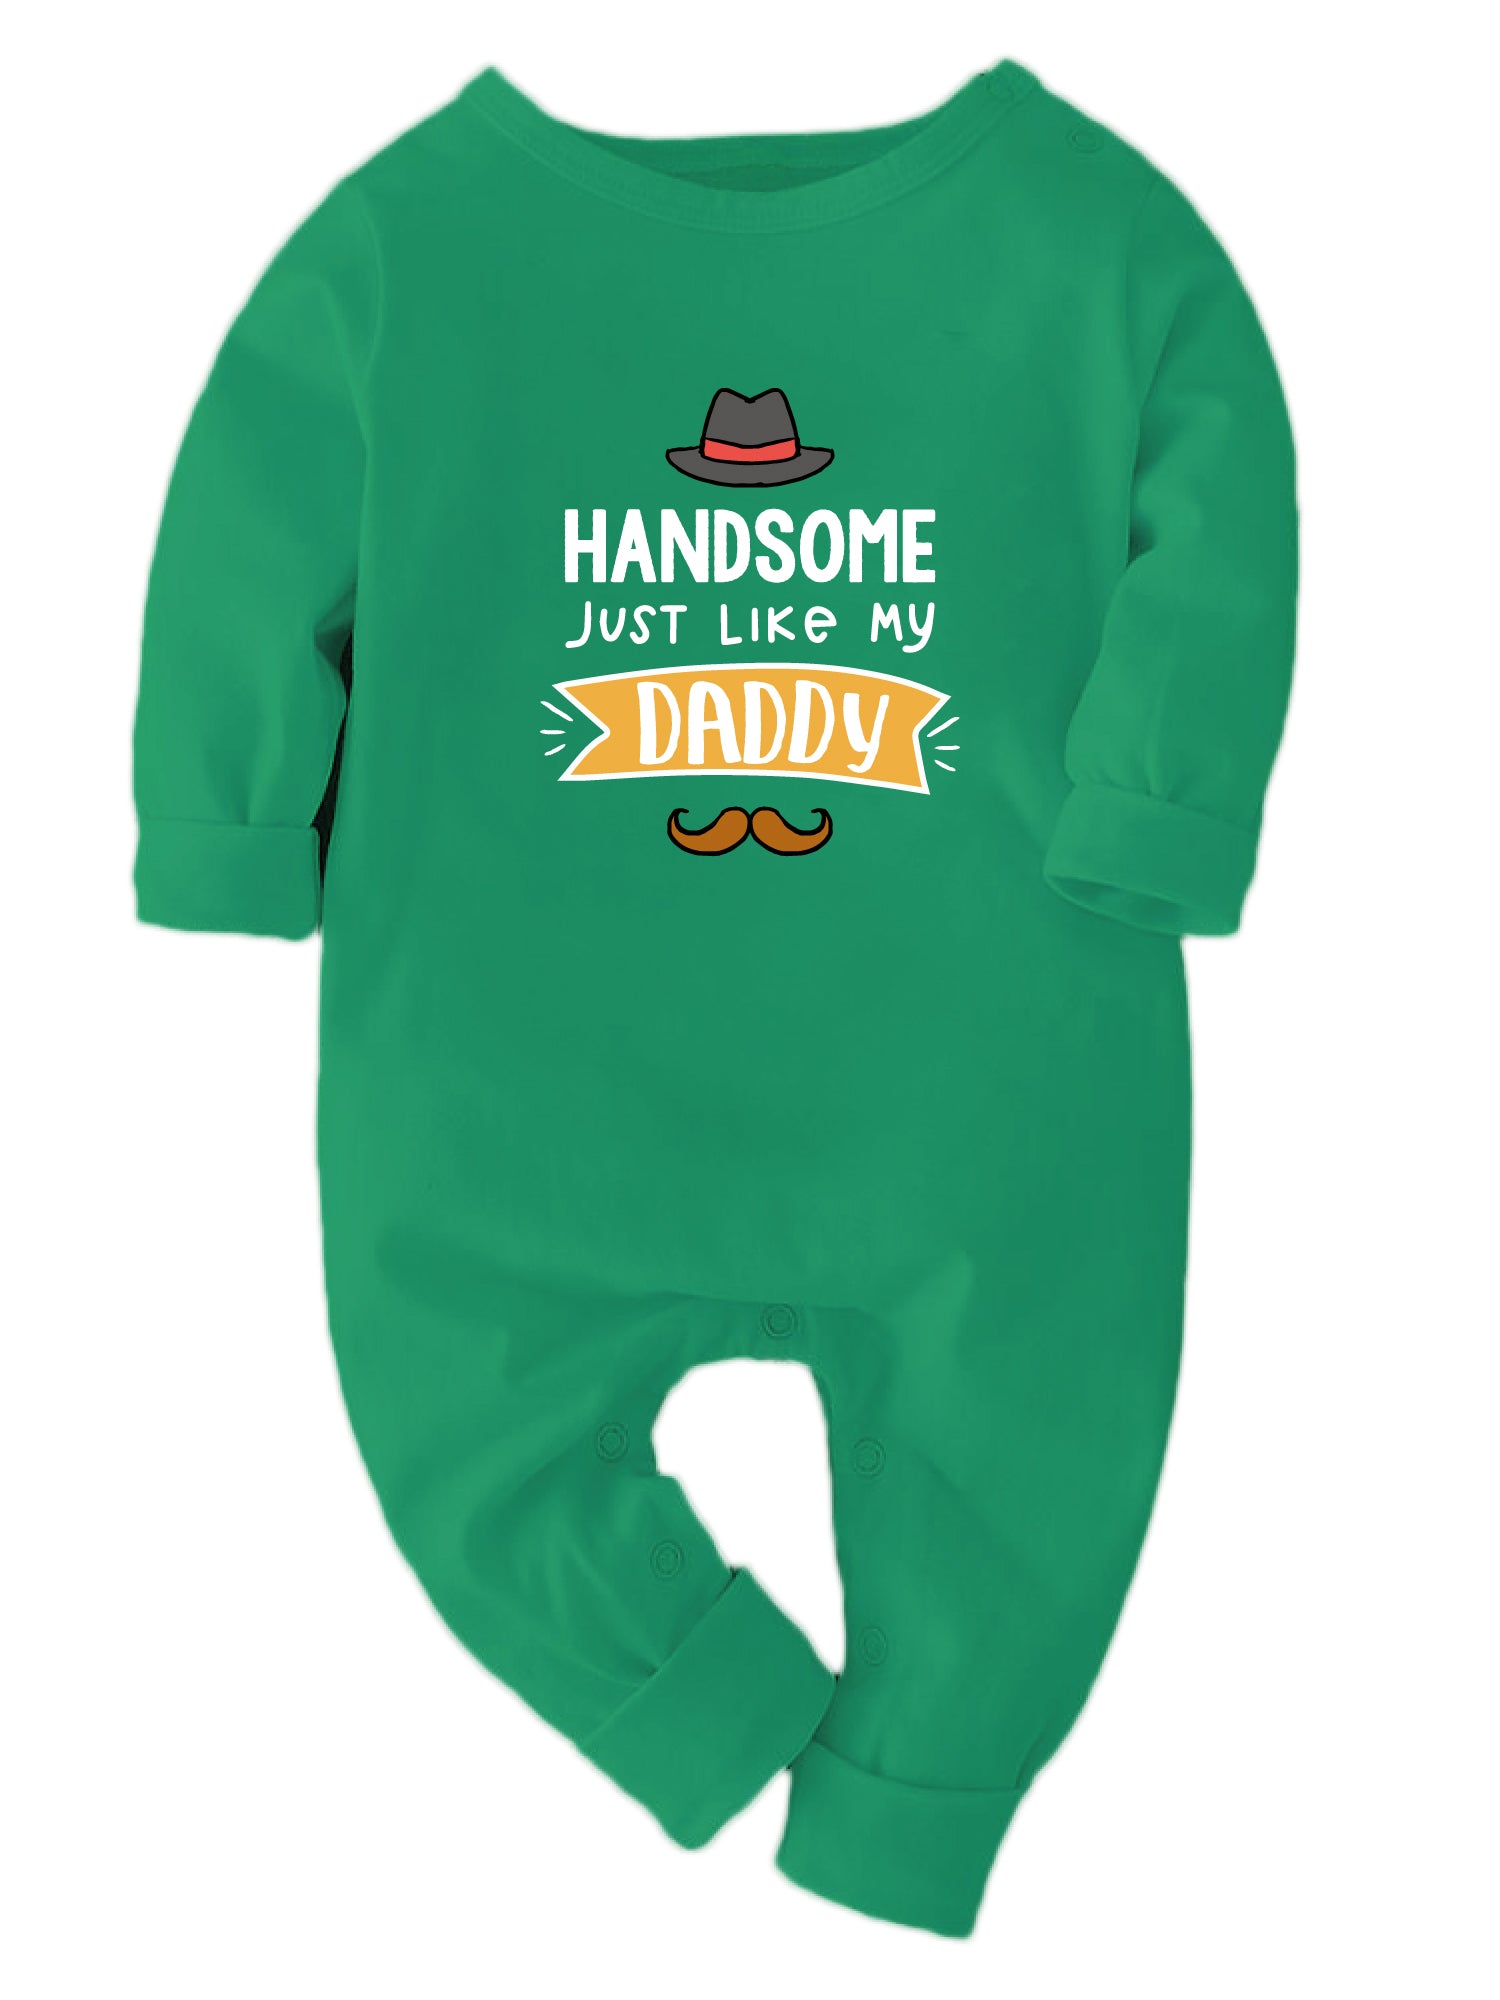 Handsome Just Like My Daddy - Bodysuit